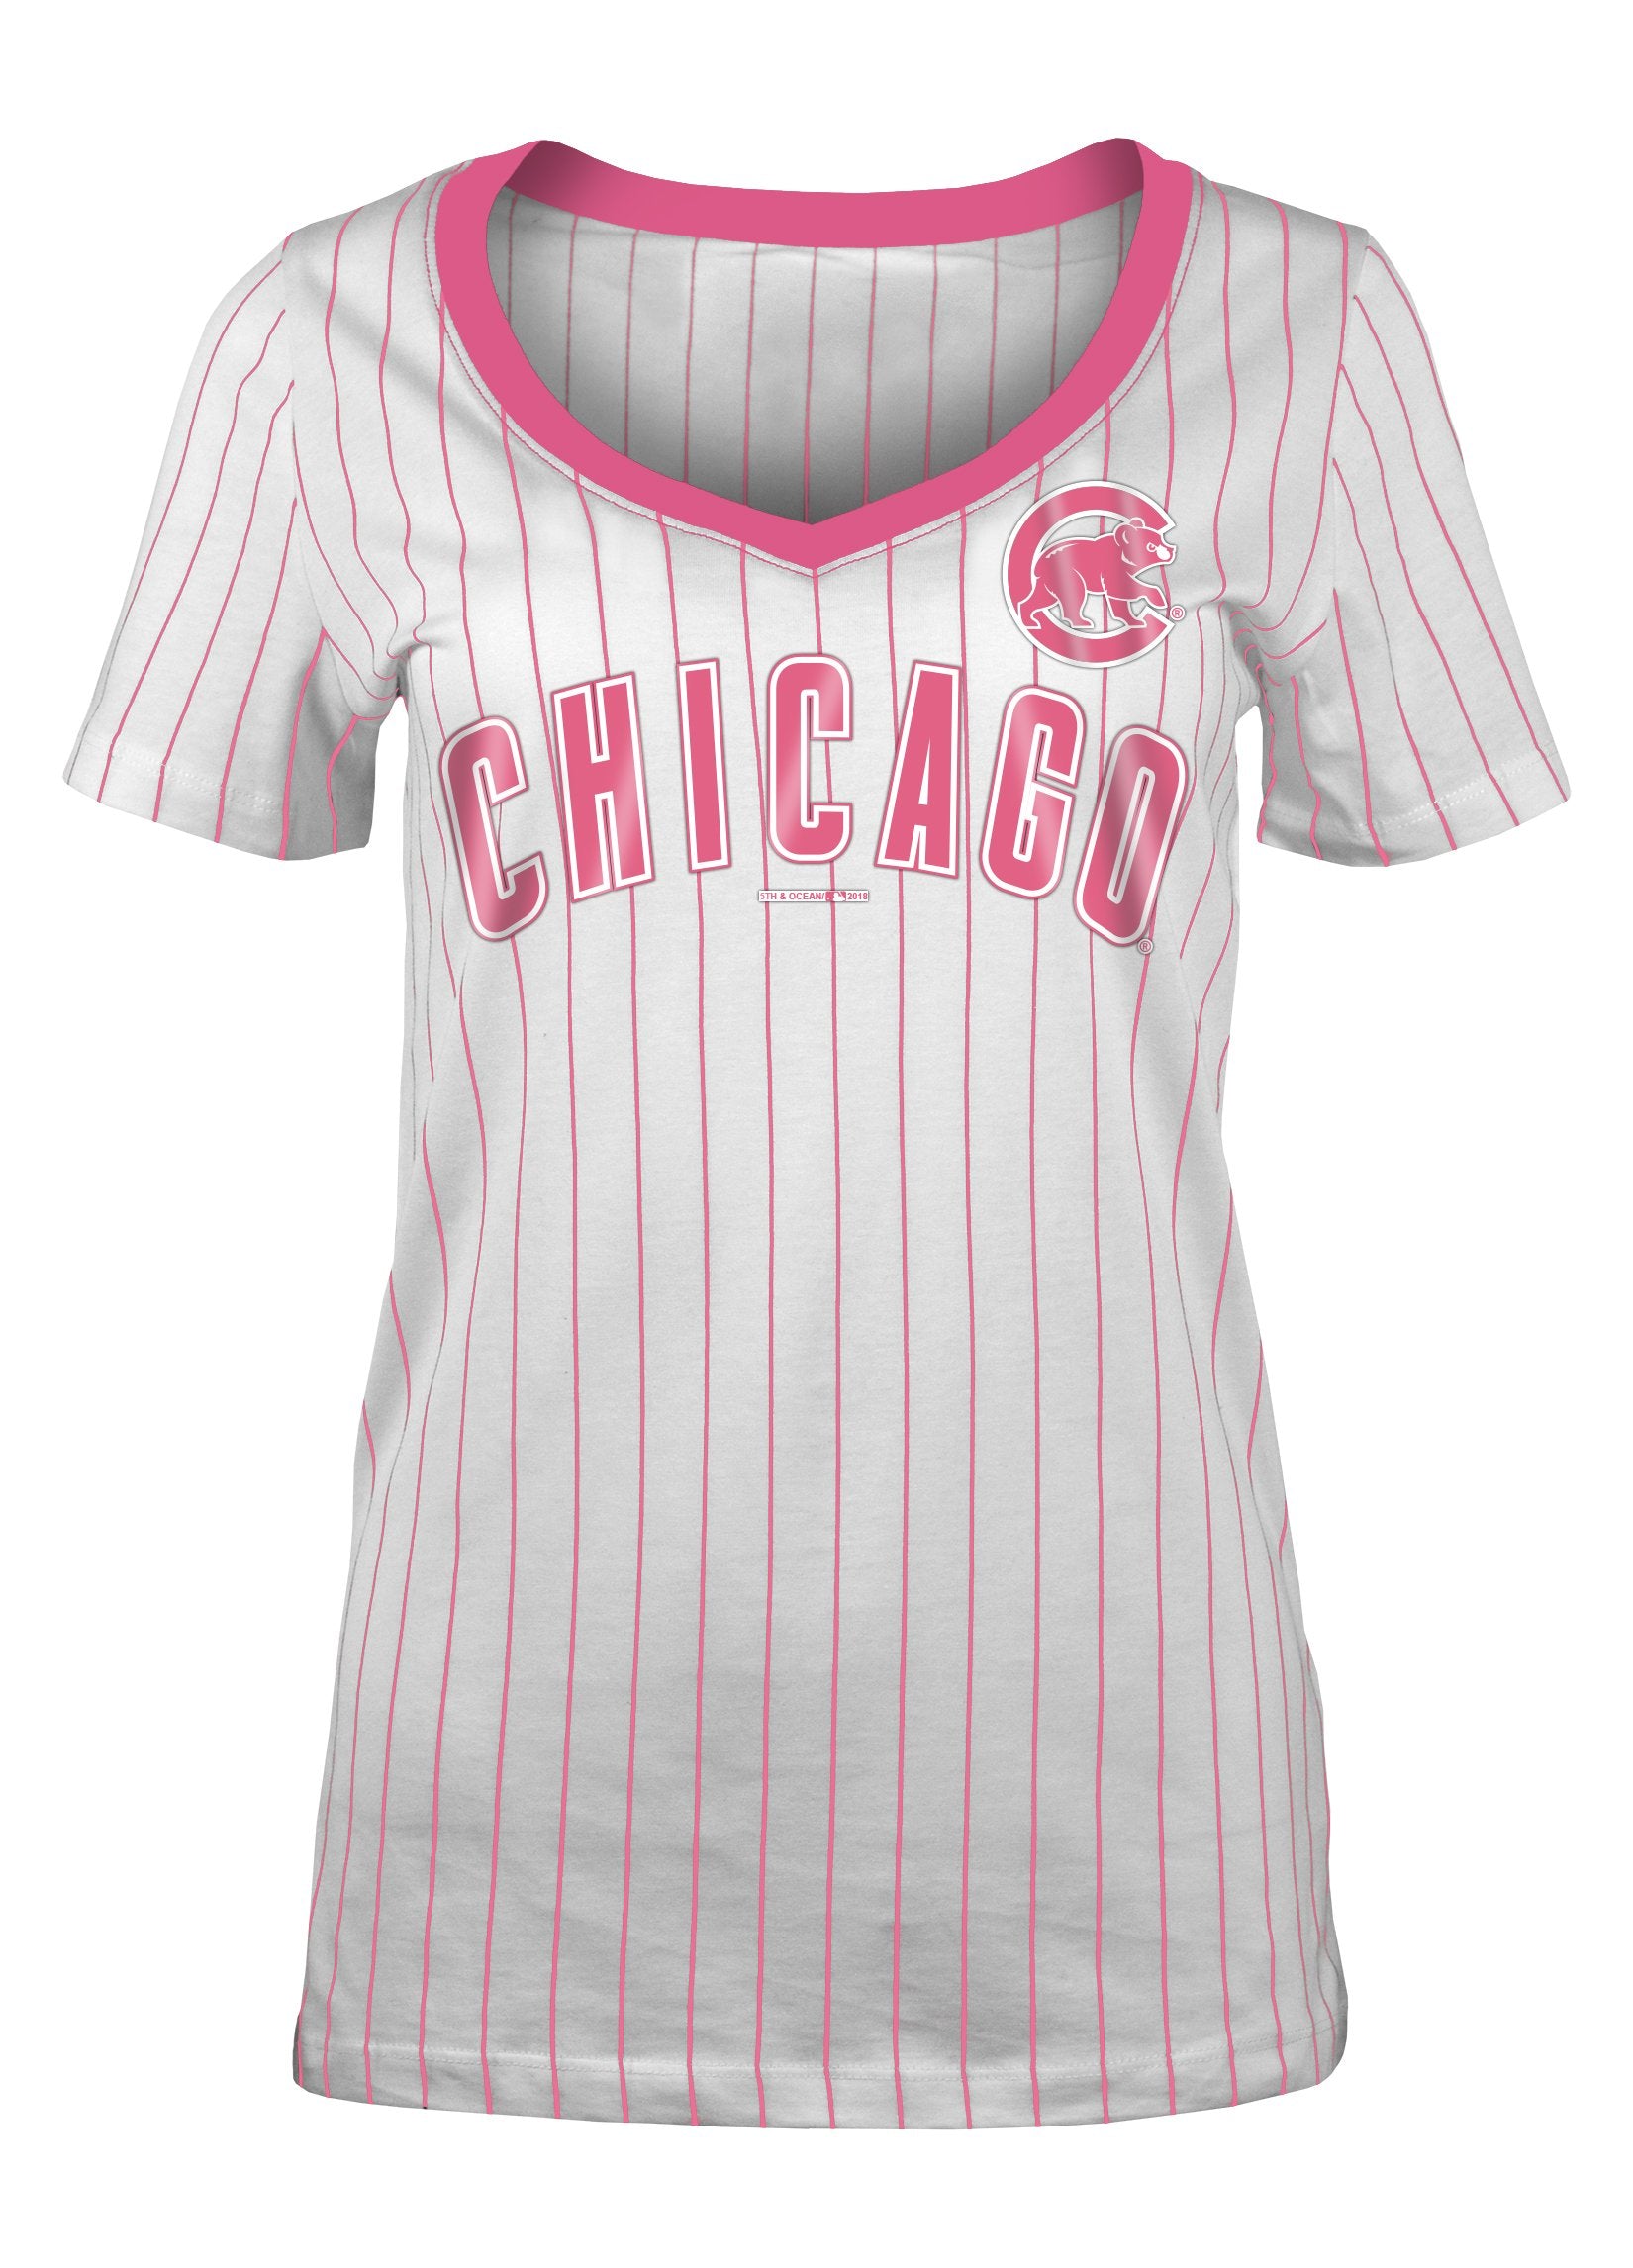 5th & Ocean by New Era Chicago Cubs Women's Royal Baby Jersey V-Neck T-Shirt Size: Small